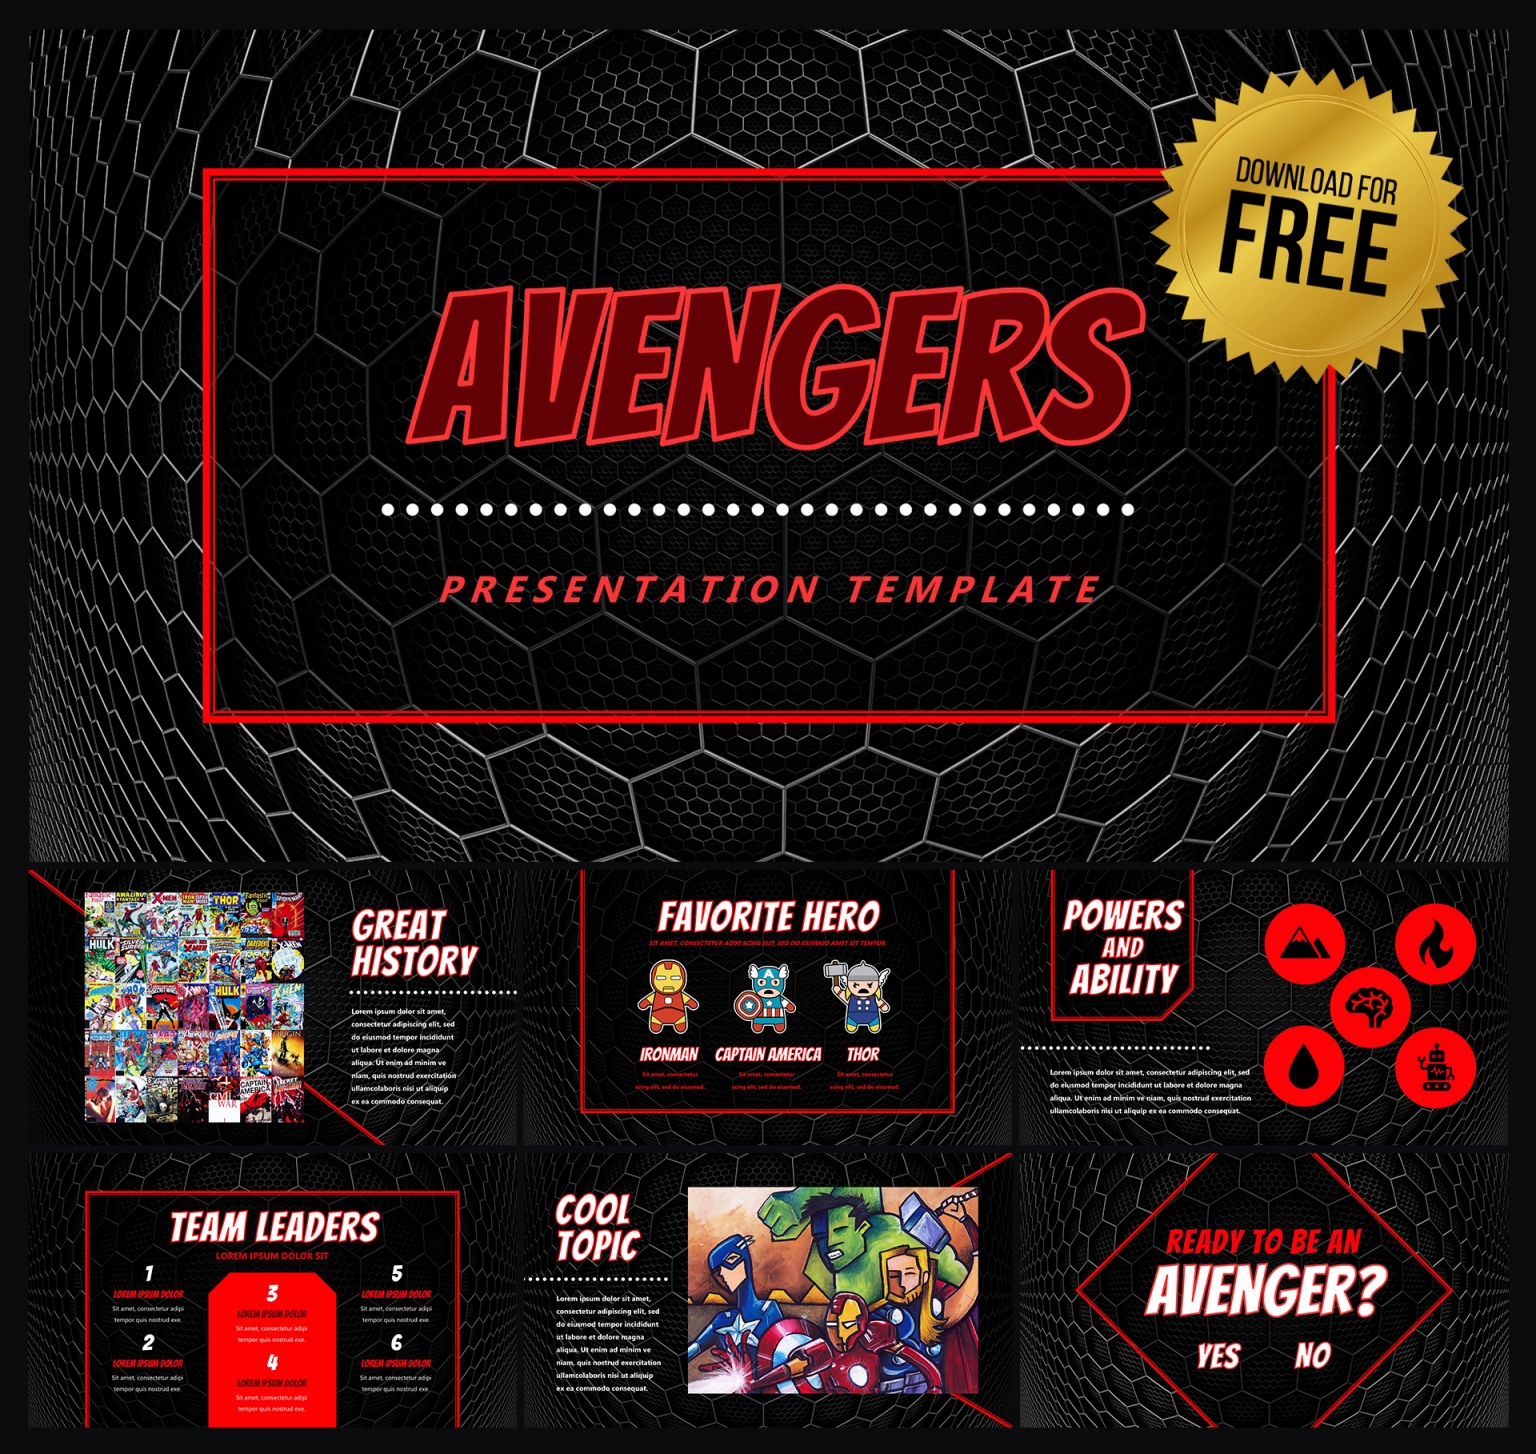 Avengers PowerPoint Template for Movie and Comic Book Presentations